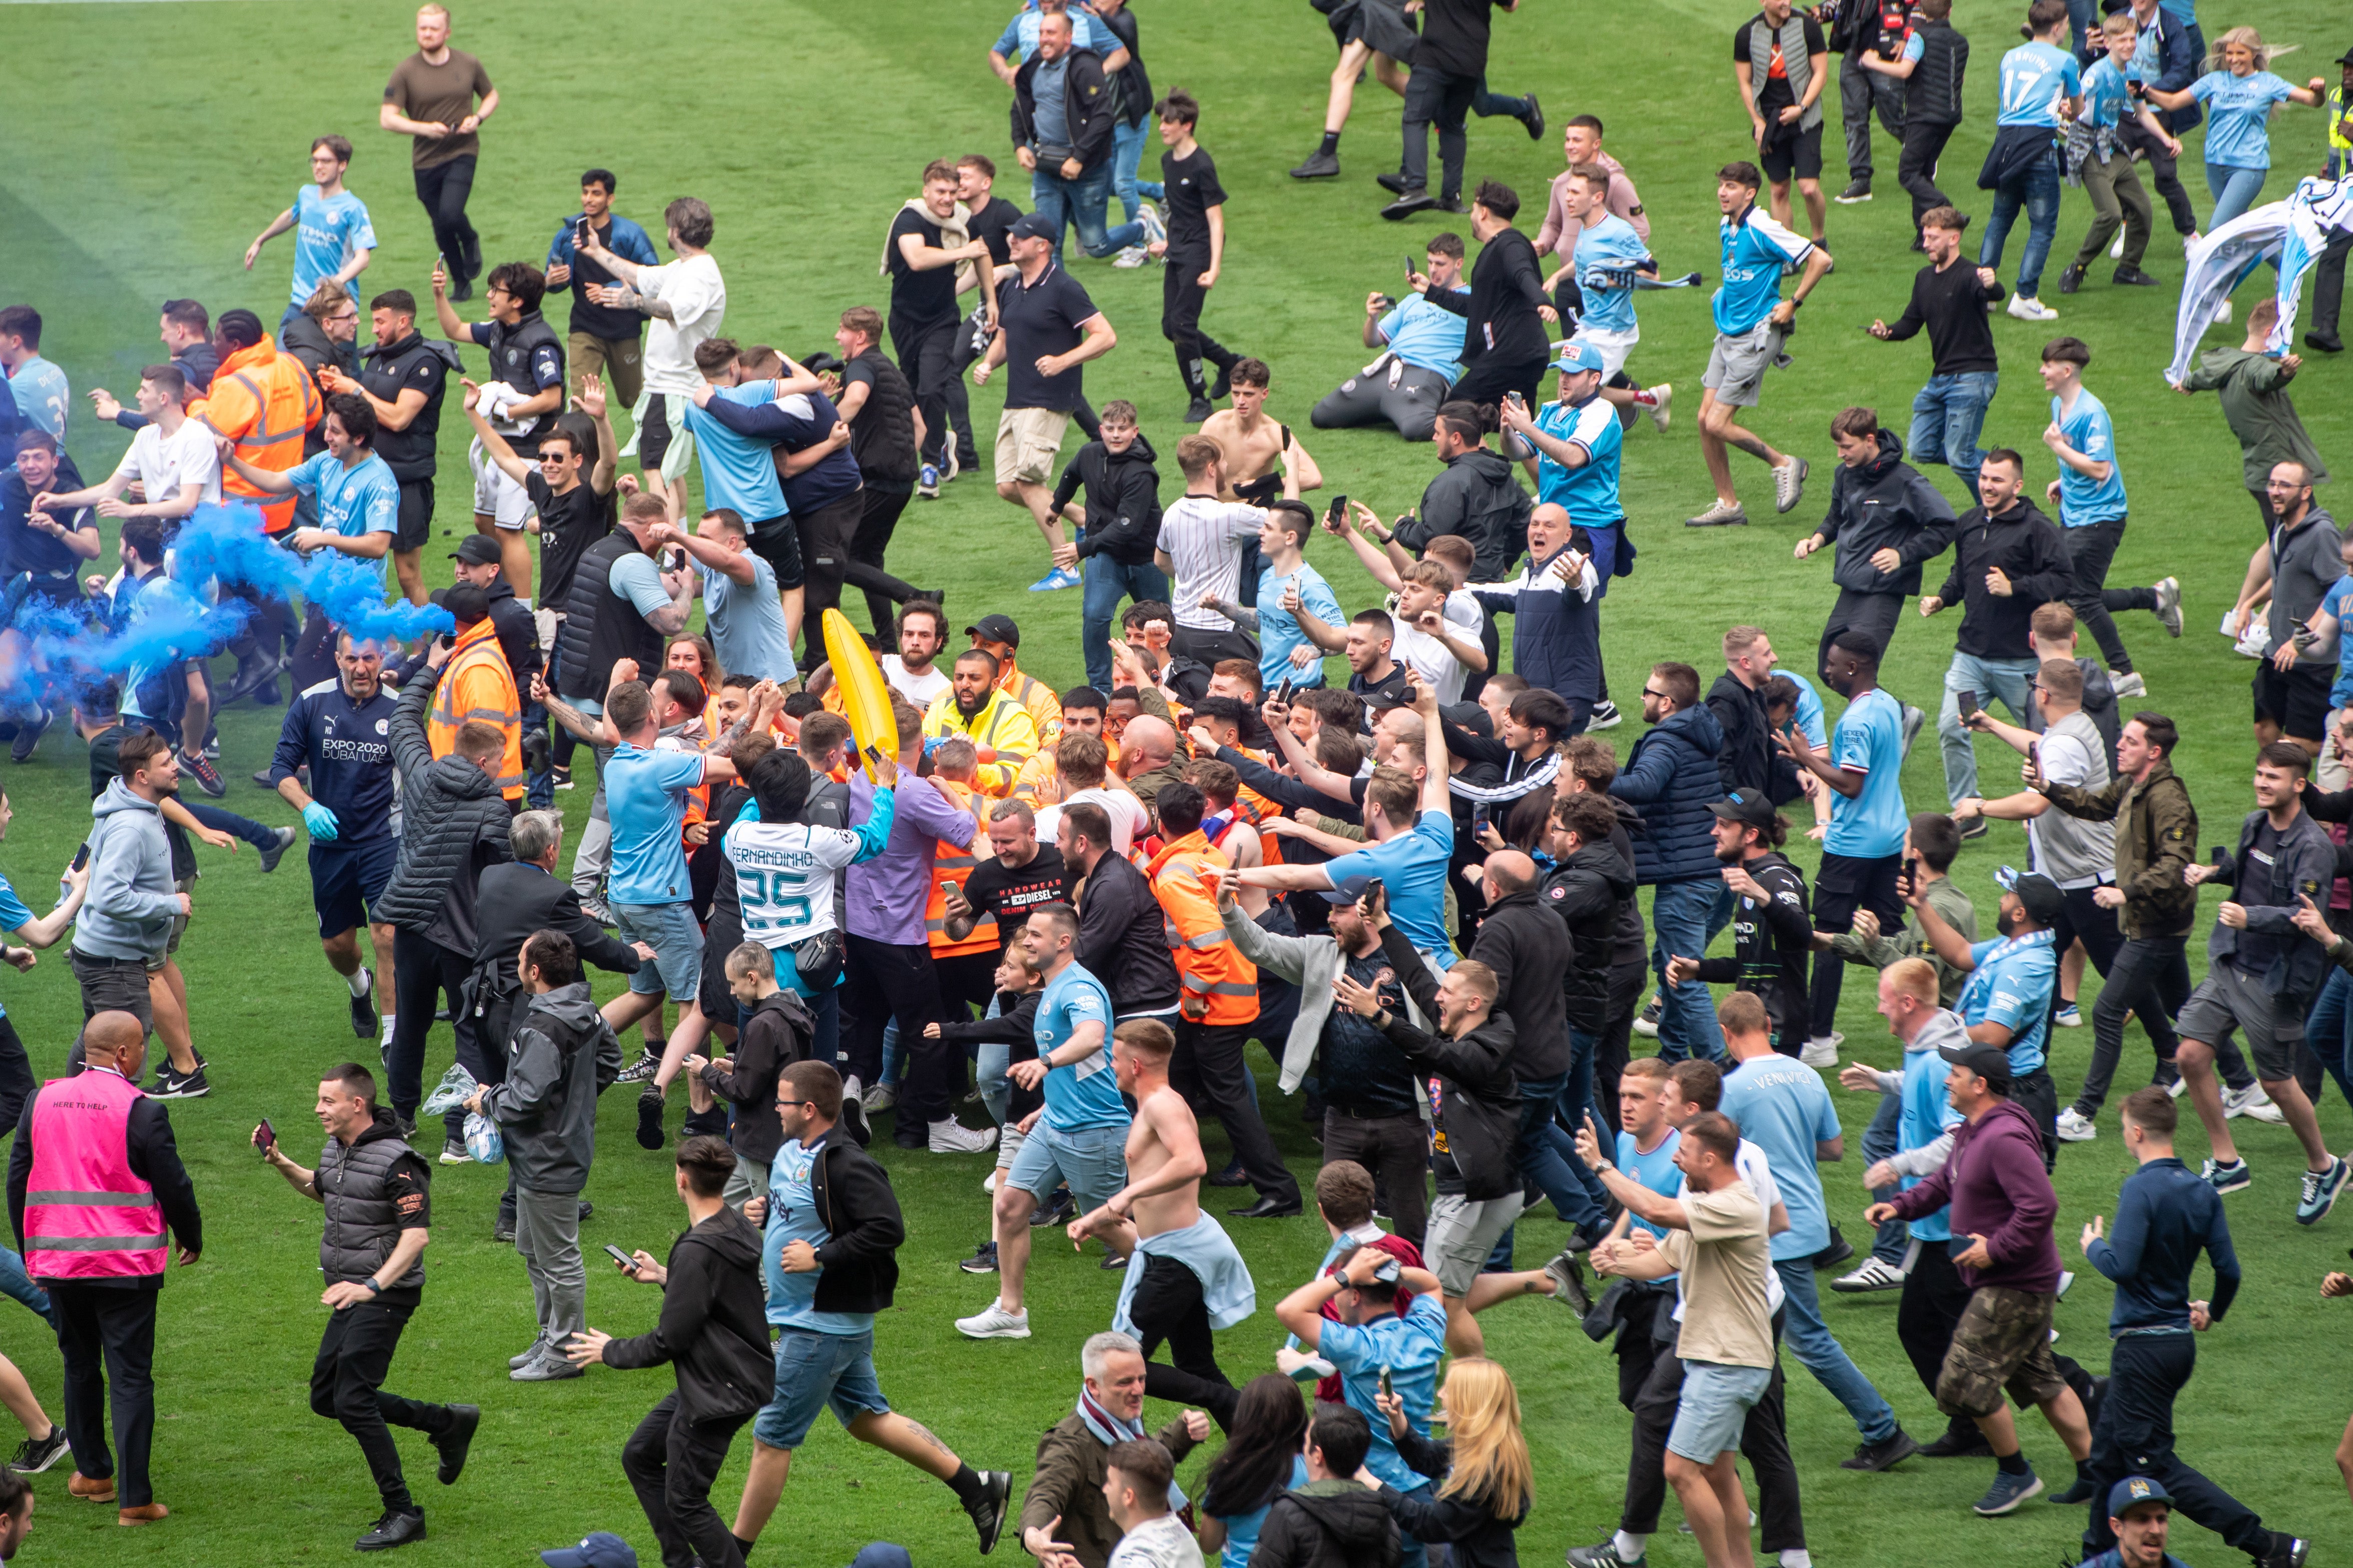 Thousands of fans rushed the pitch after City won Premier League title on Sunday